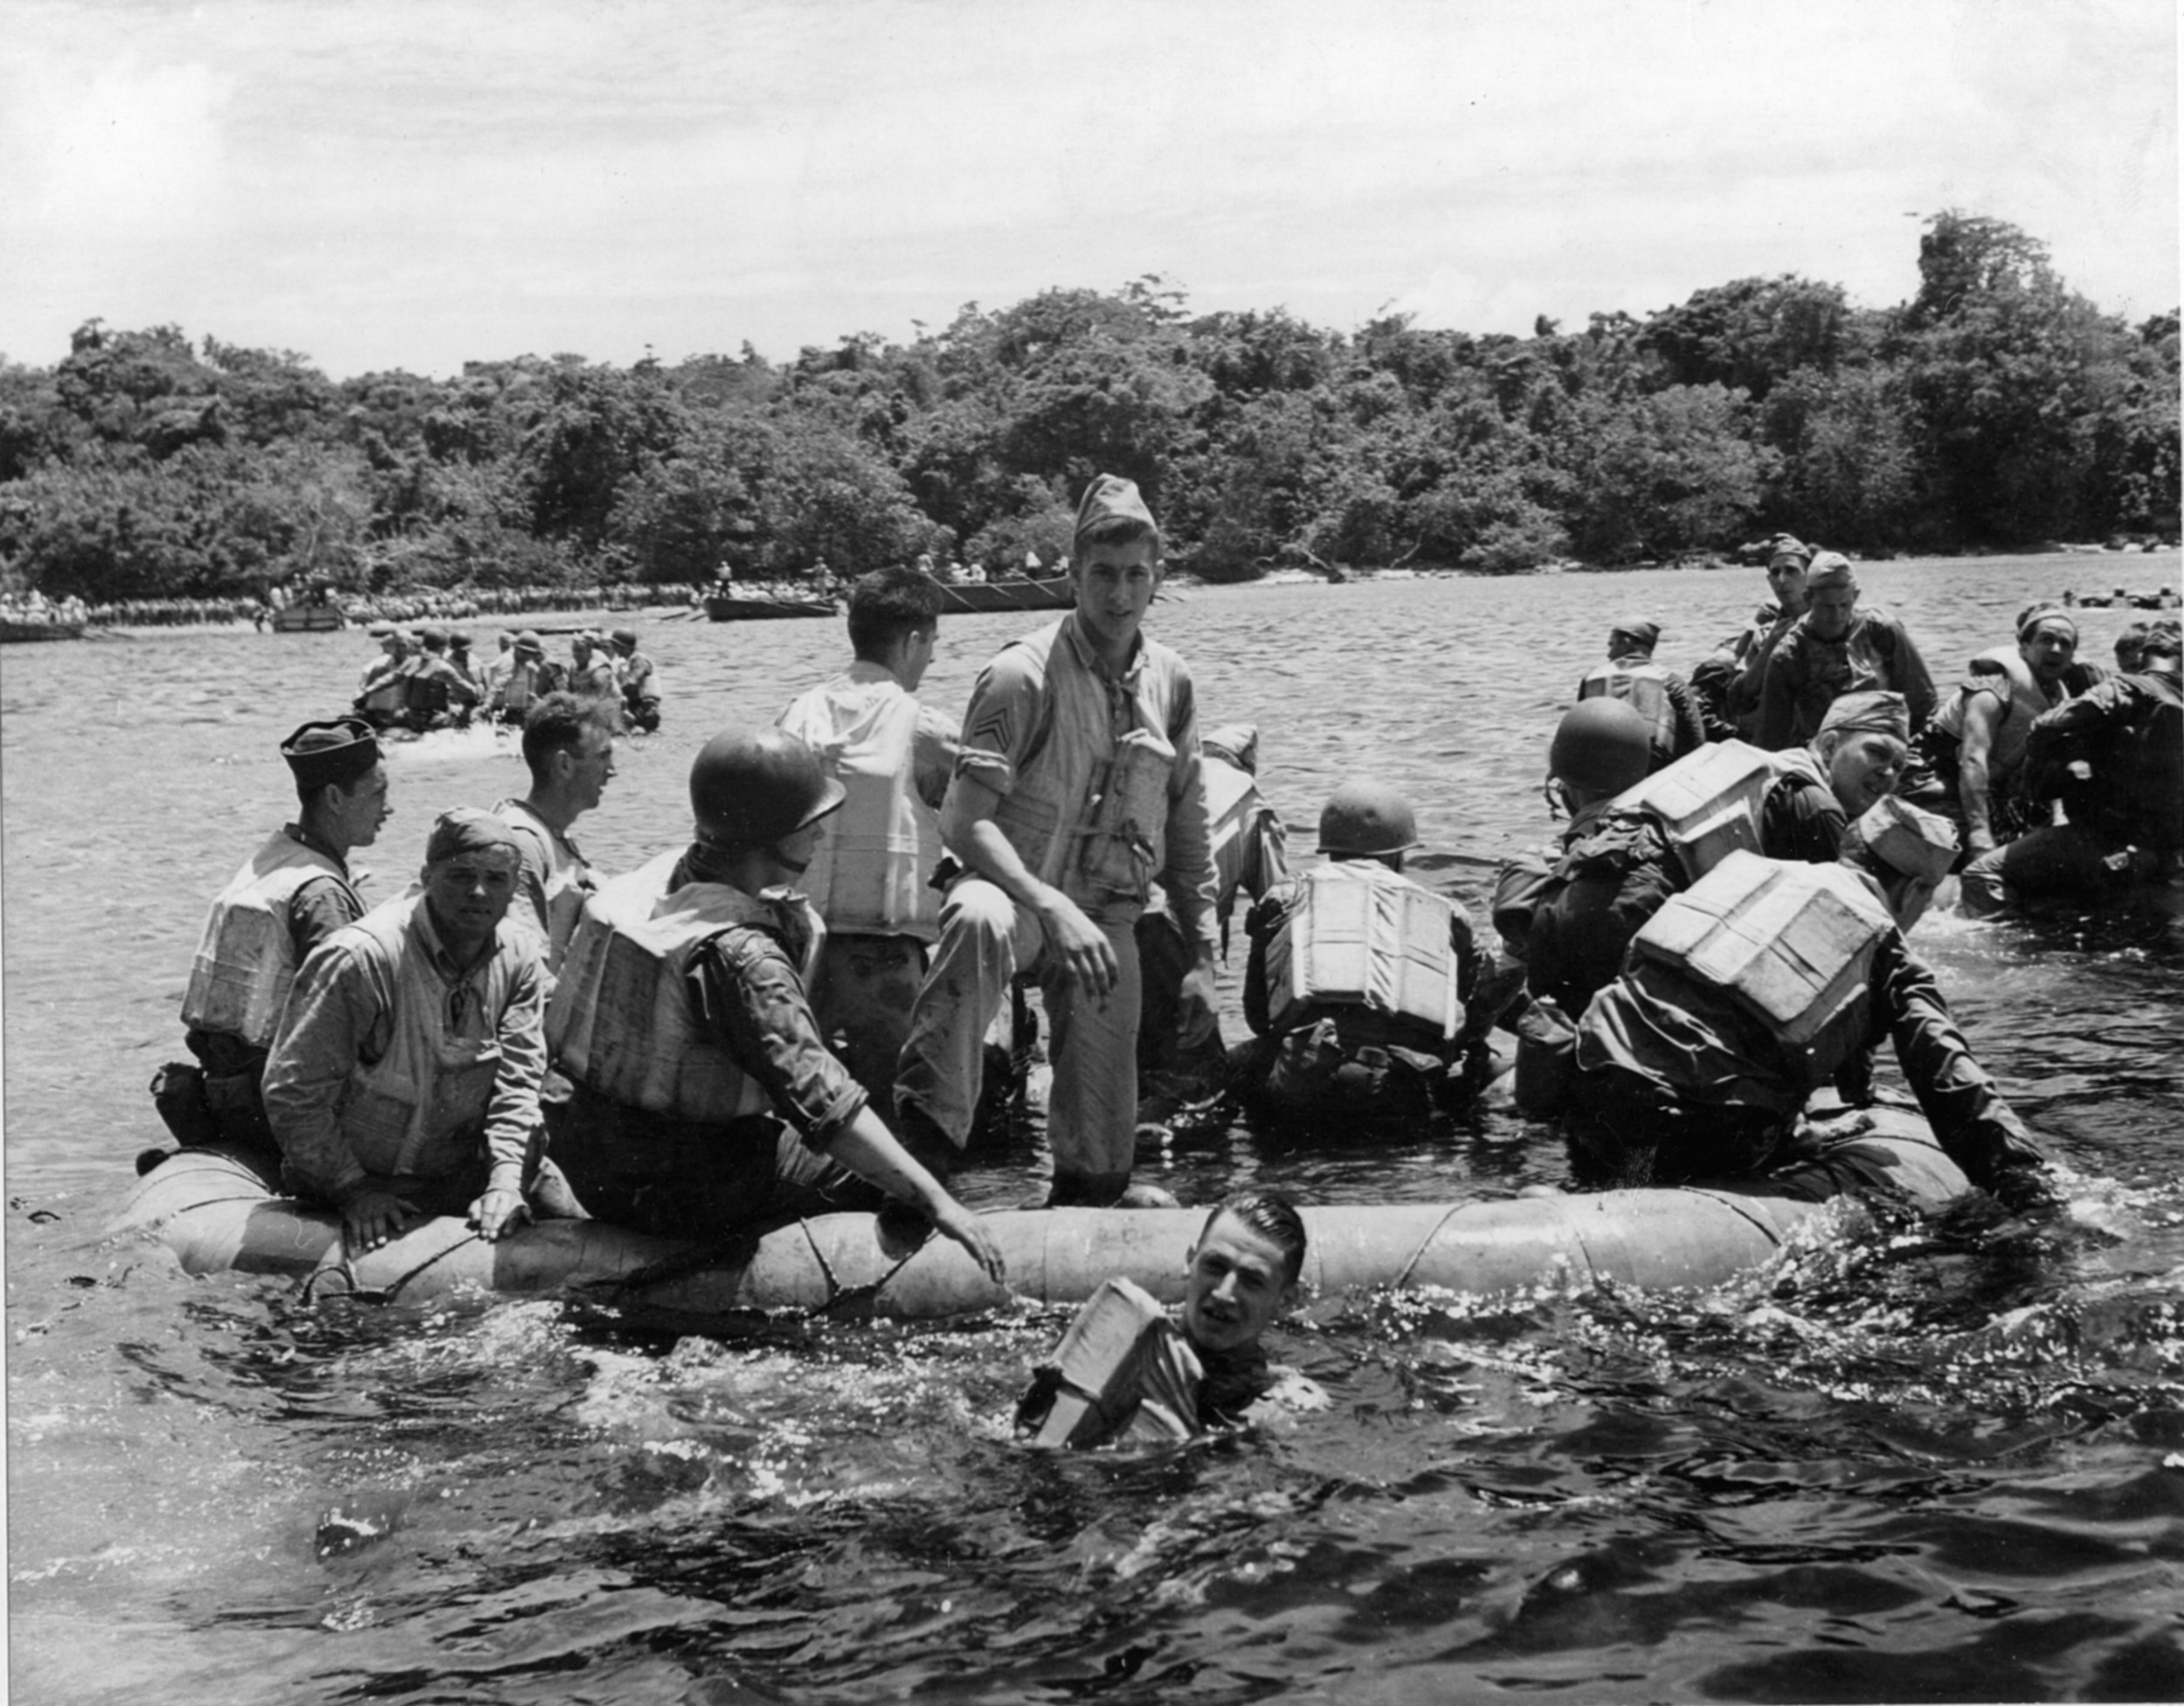 Some of the soldiers remained dry throughout the evacuation; these soldiers were left to paddle with their hands.